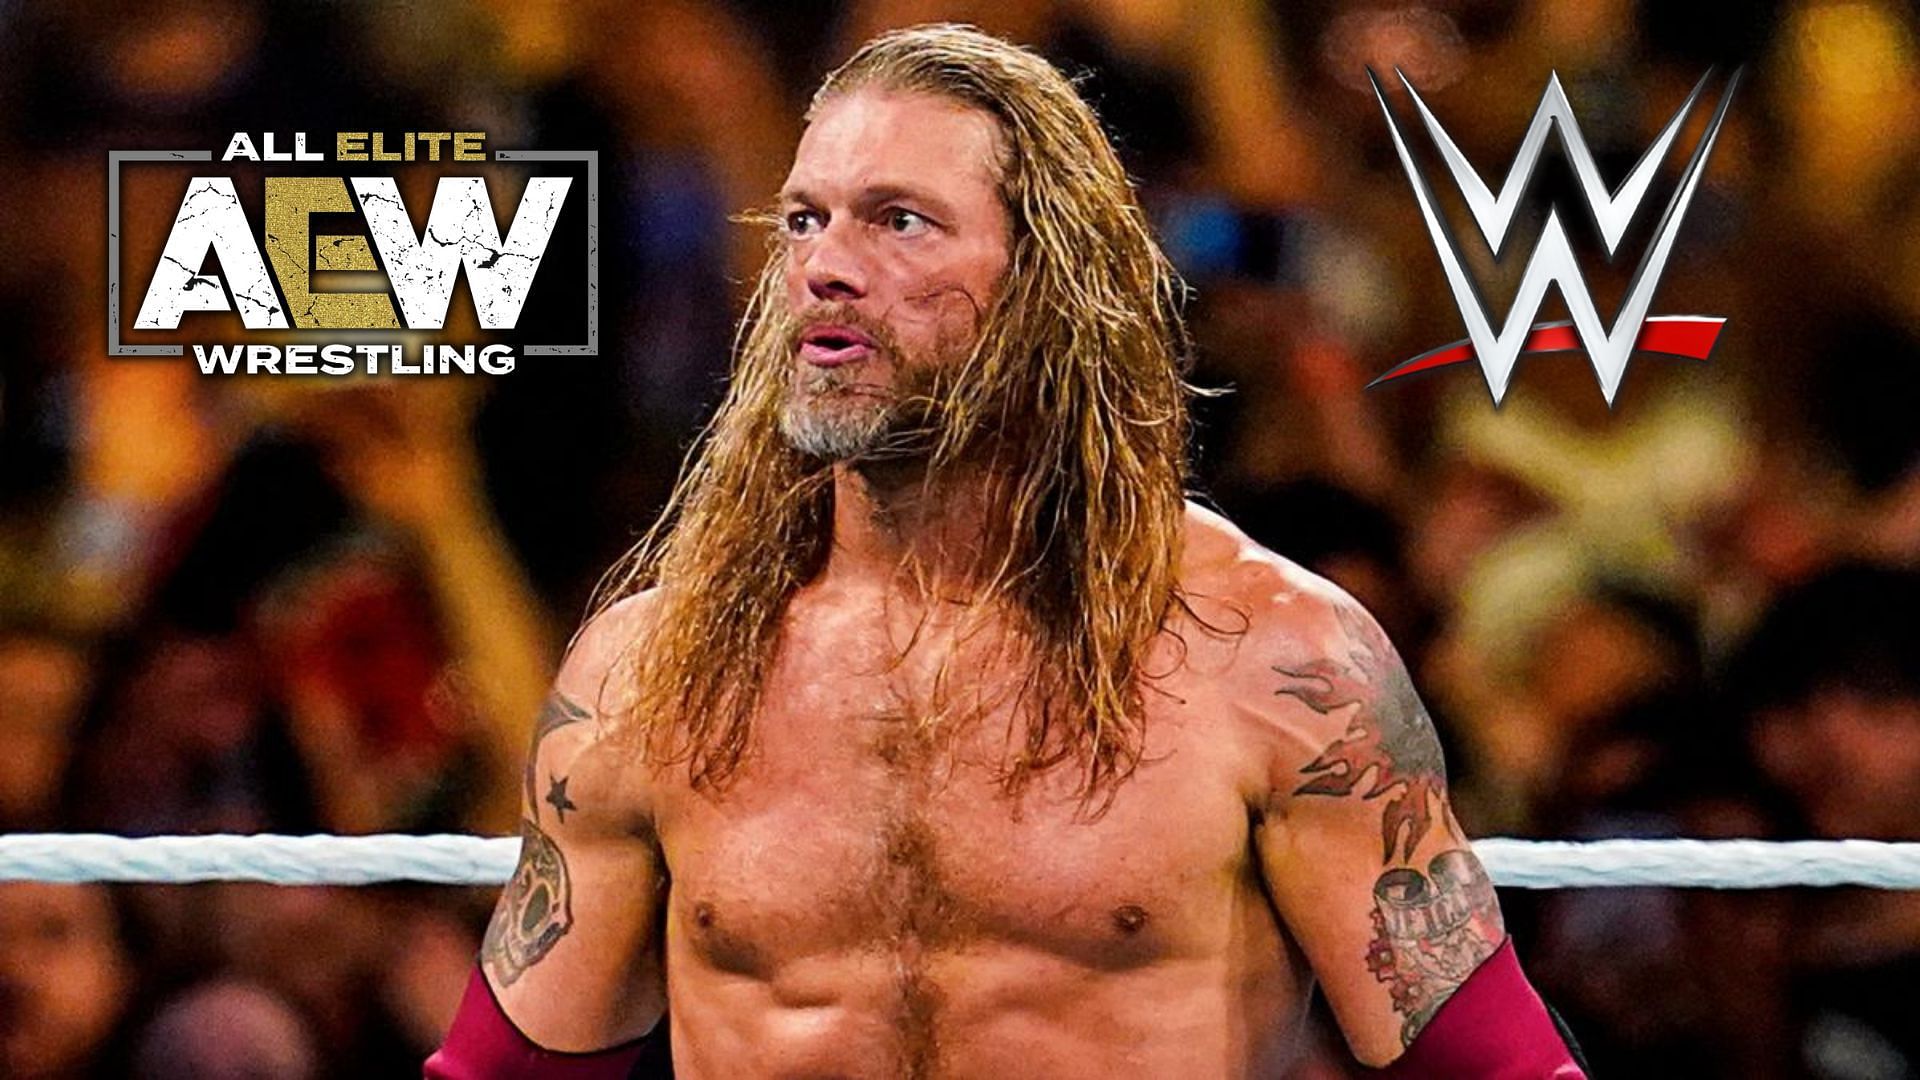 Edge is apparently quite friendly with an AEW star